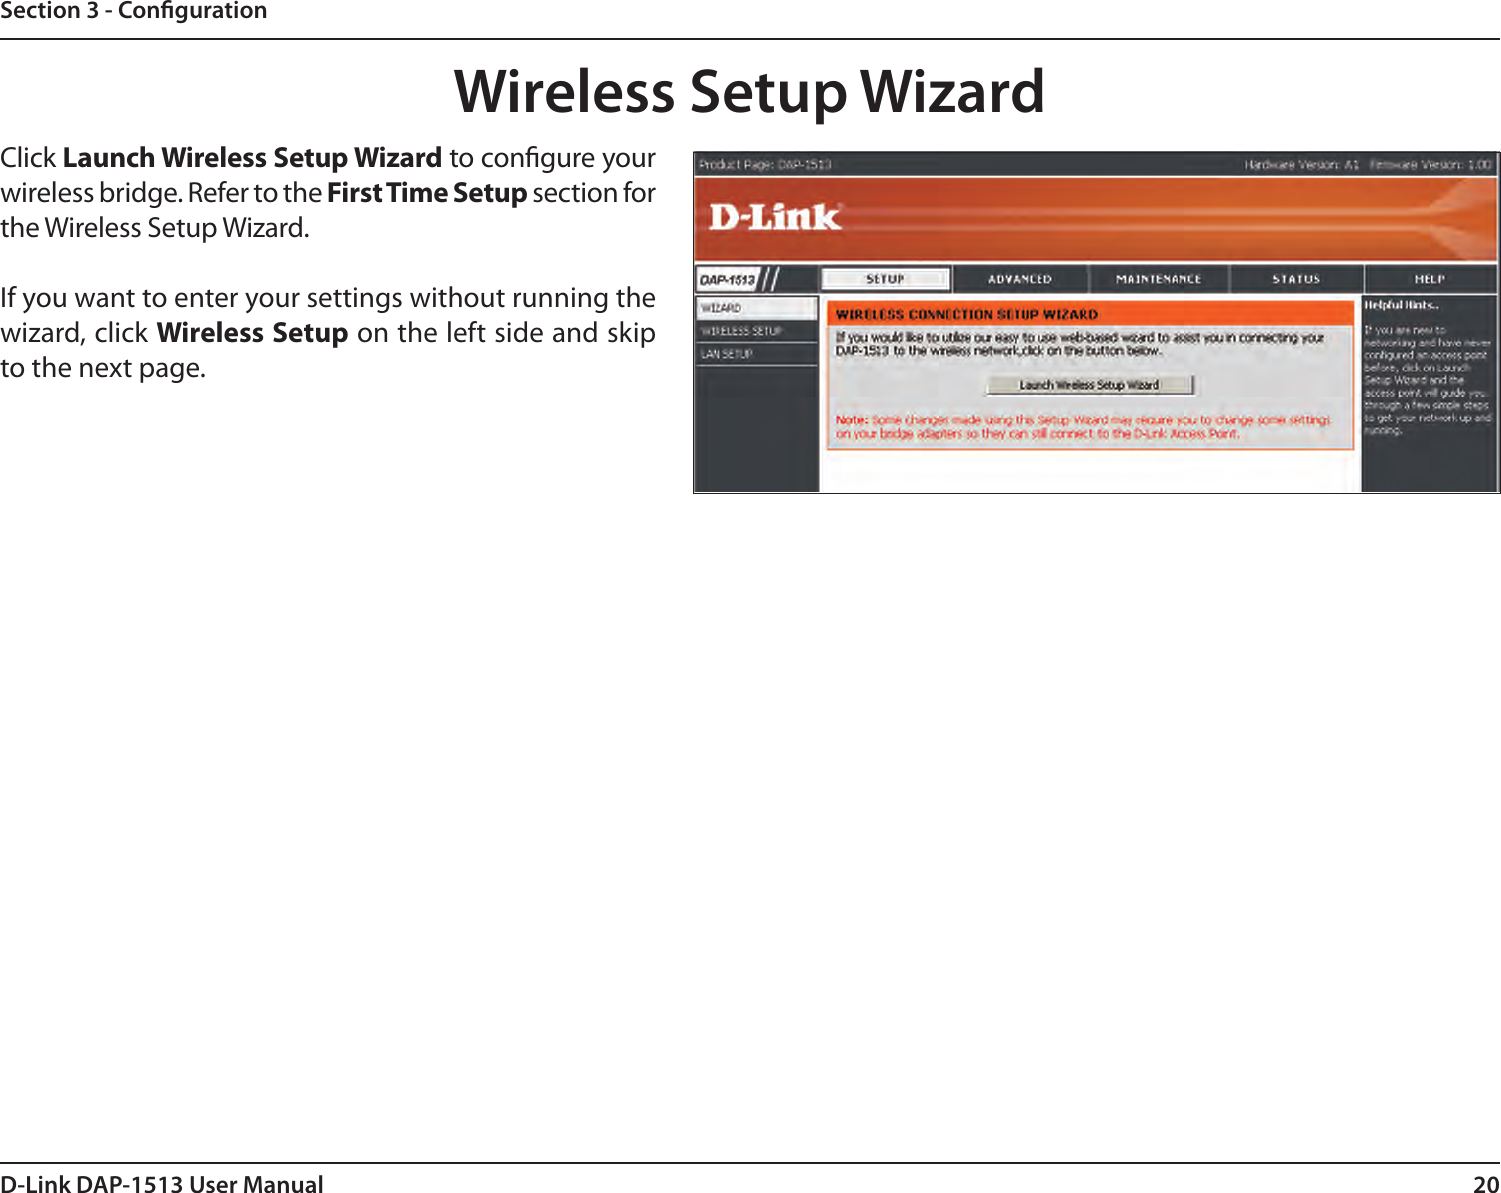 20D-Link DAP-1513 User ManualSection 3 - CongurationClick Launch Wireless Setup Wizard to congure your wireless bridge. Refer to the First Time Setup section for the Wireless Setup Wizard.If you want to enter your settings without running the wizard, click Wireless Setup on the left side and skip to the next page.Wireless Setup Wizard